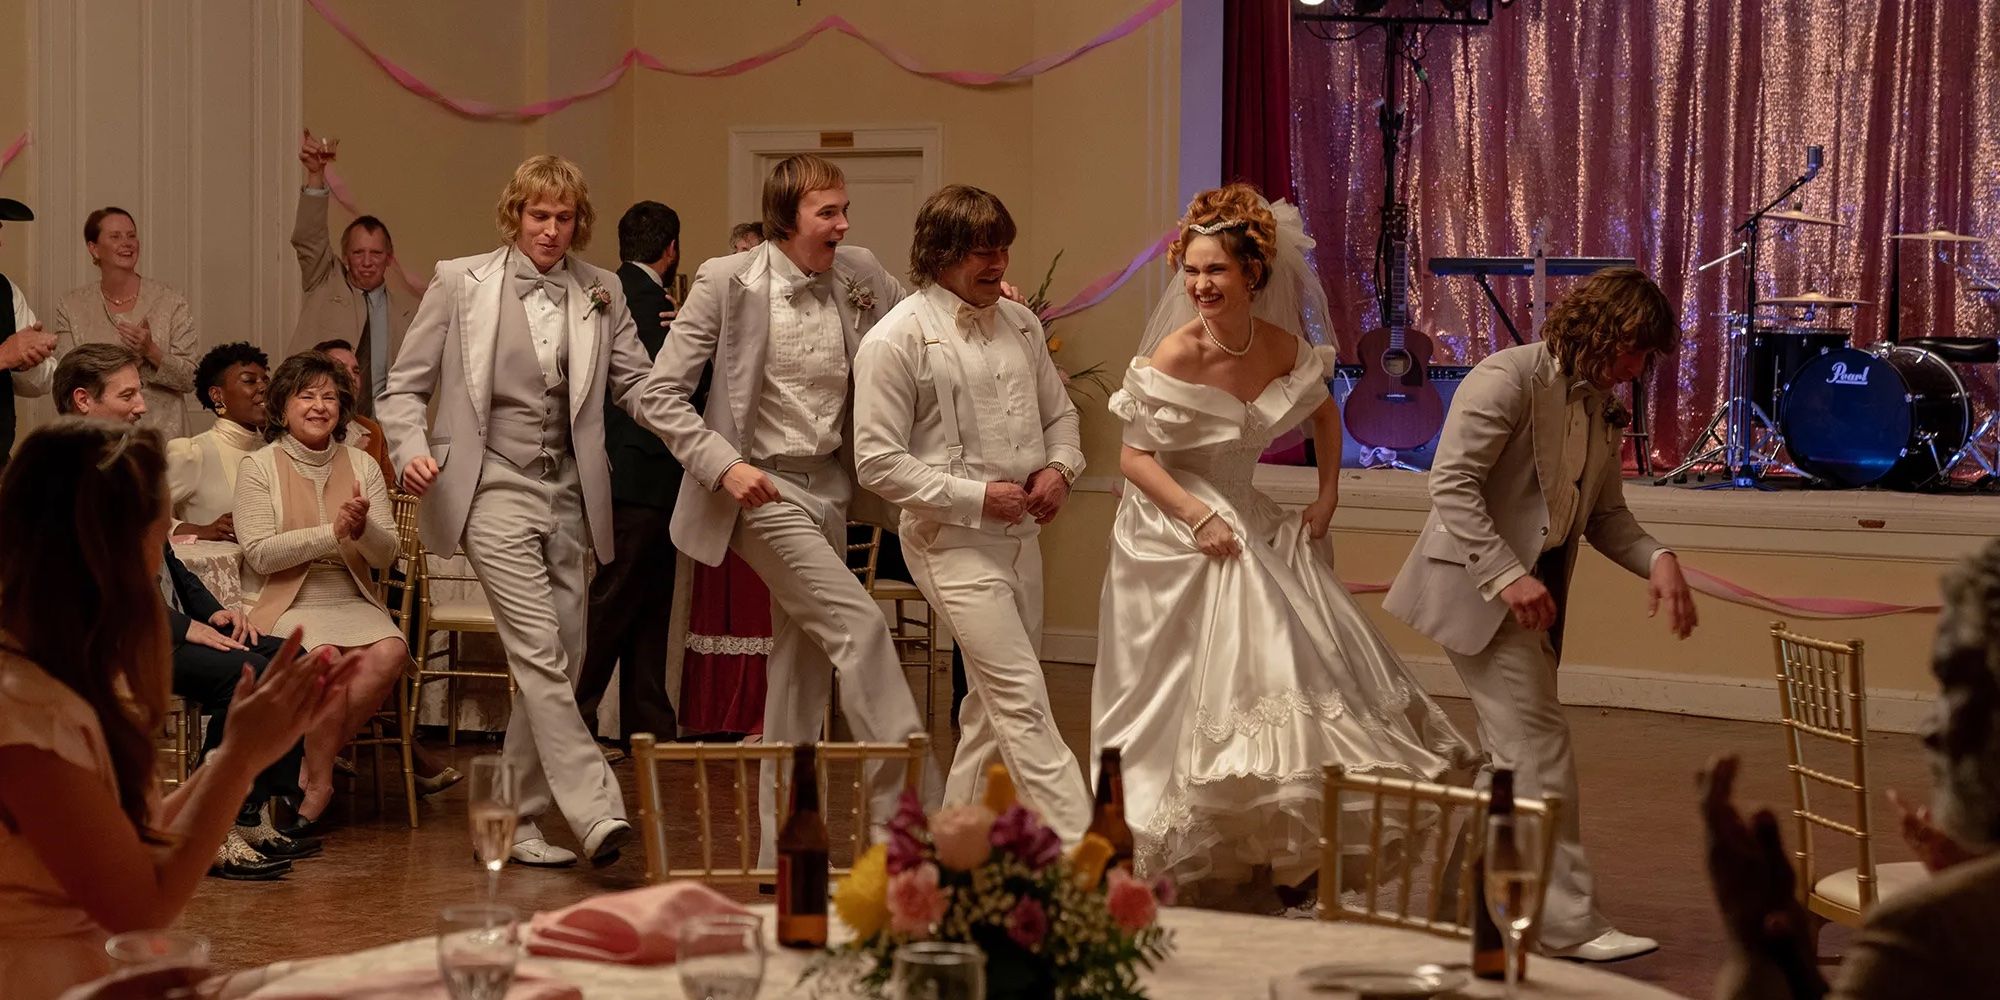 Pam (Lily James) and Kevin Von Erich (Zac Efron) dancing with his brothers at their wedding in The Iron Claw.